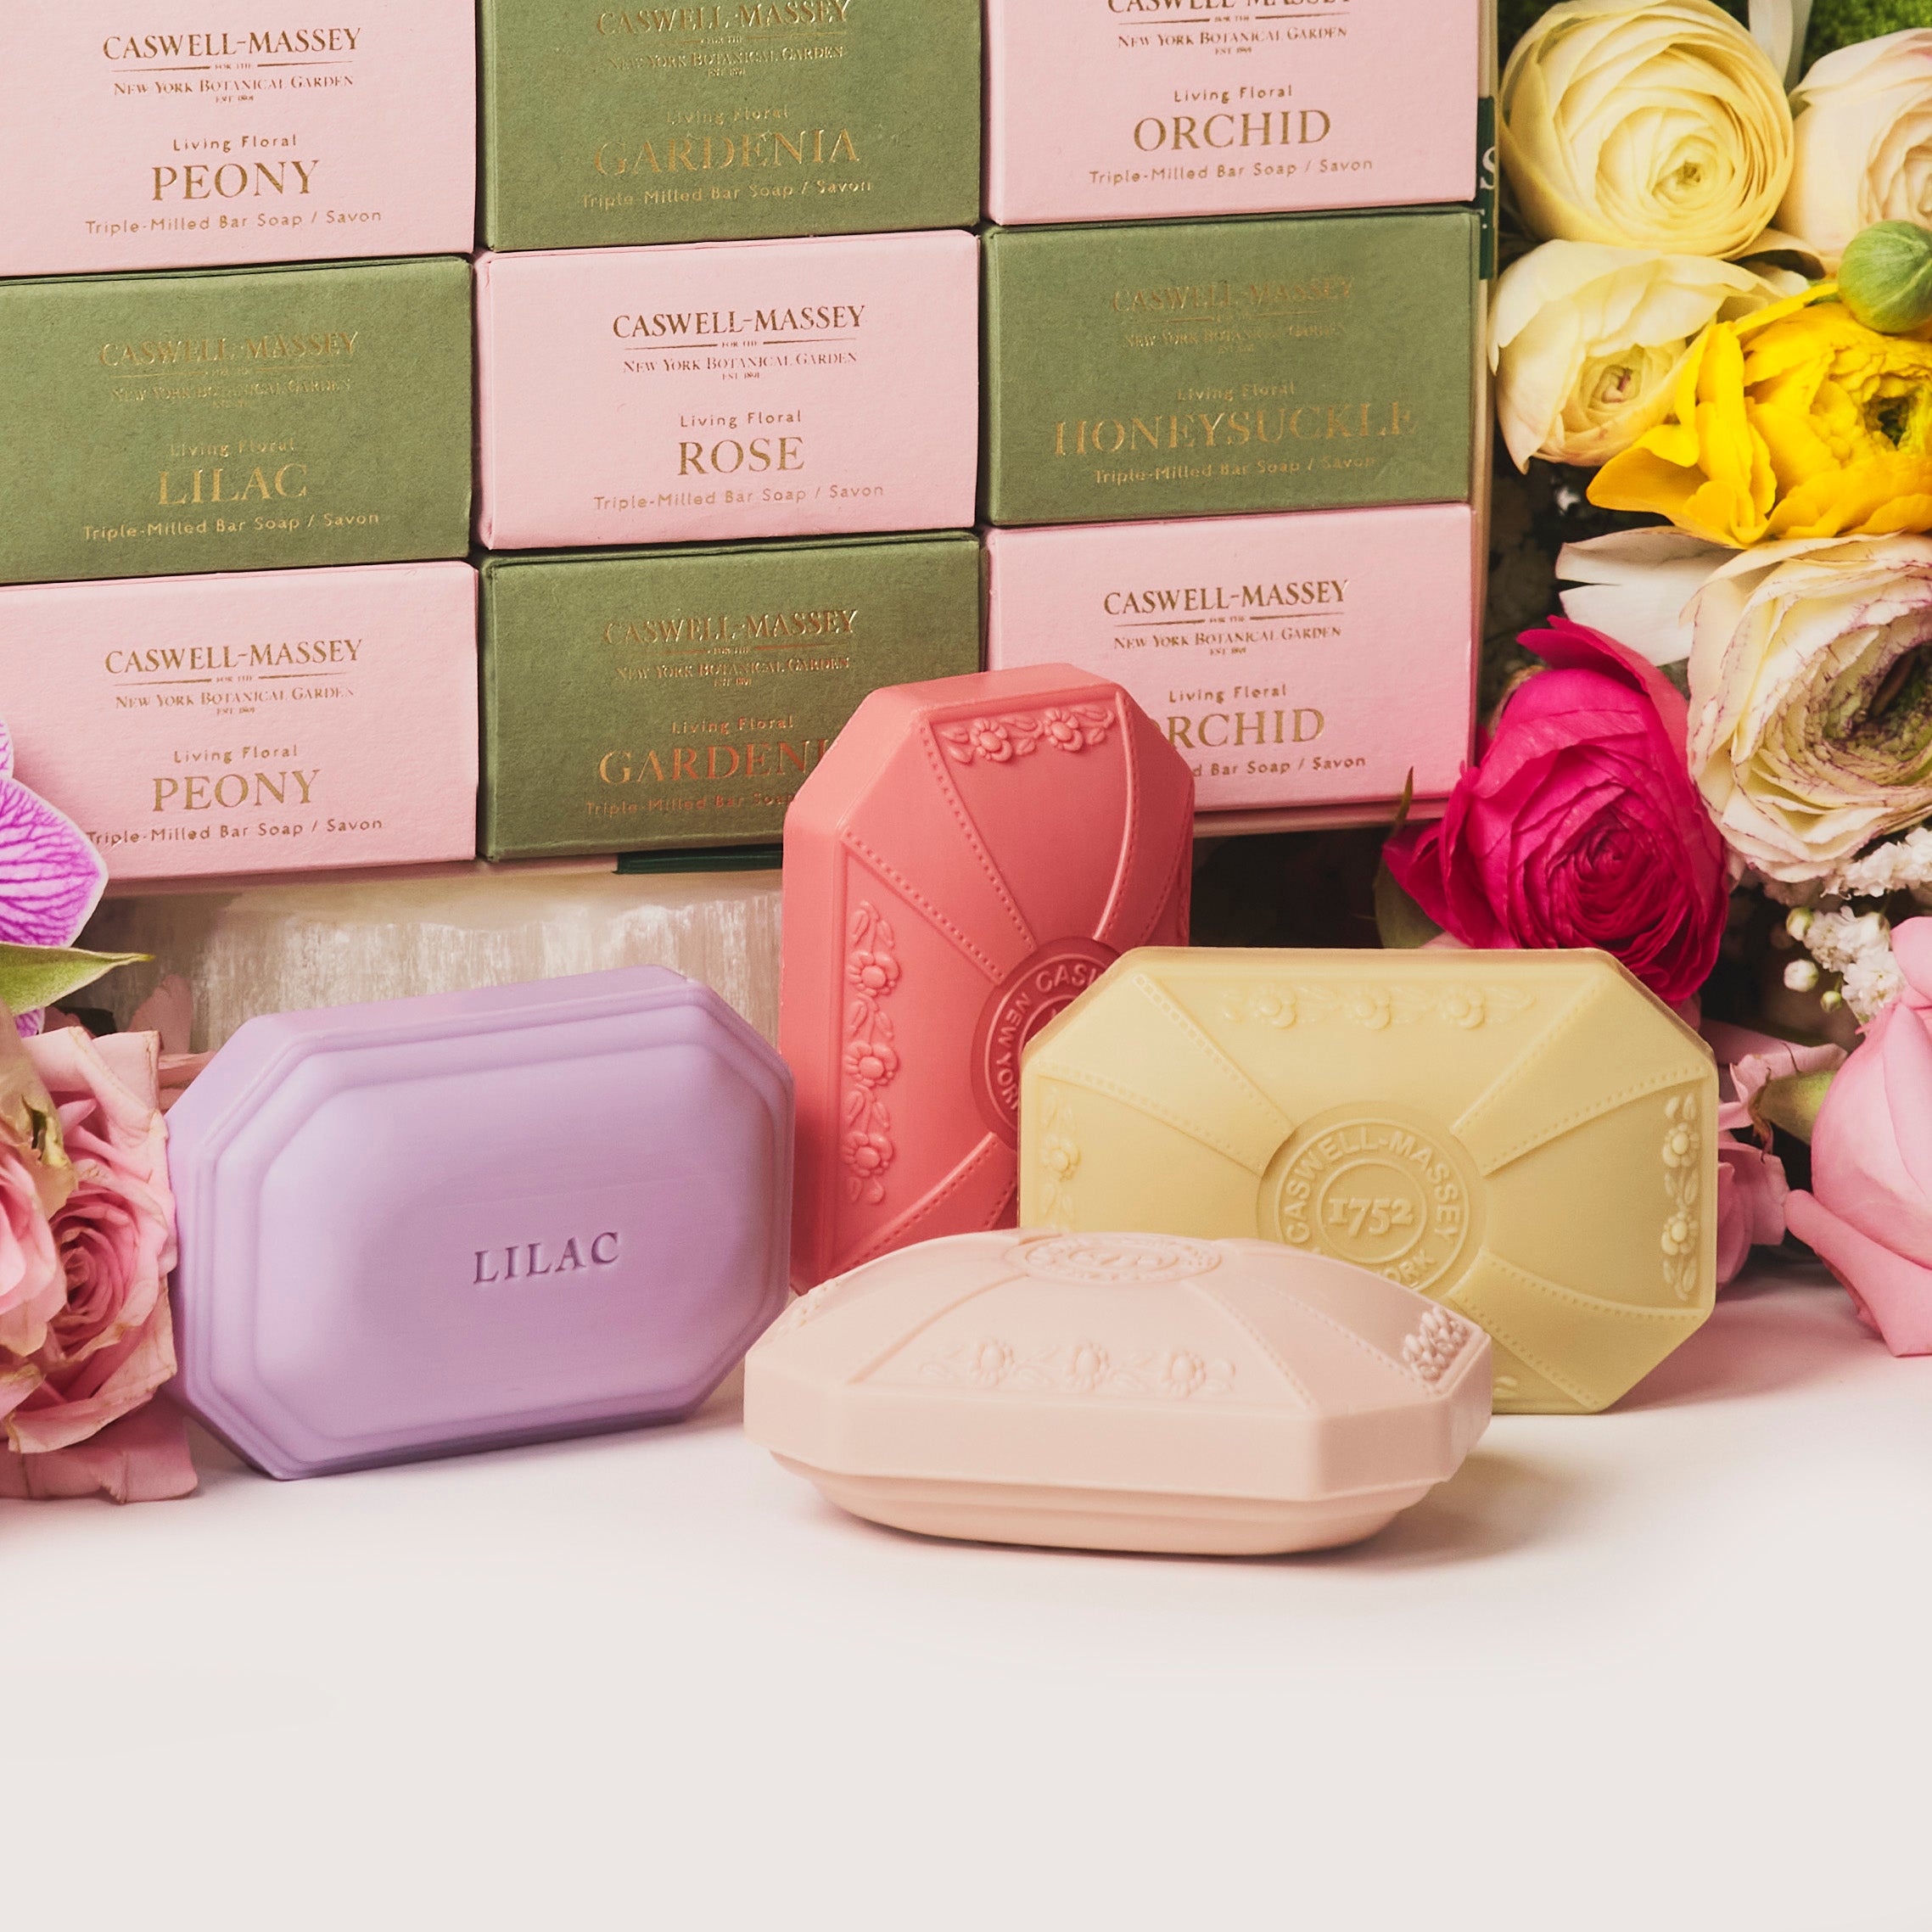 Caswell-Massey Designer Floral 12-Soap Gift Set: gift set shown with different jewel-toned bar soaps